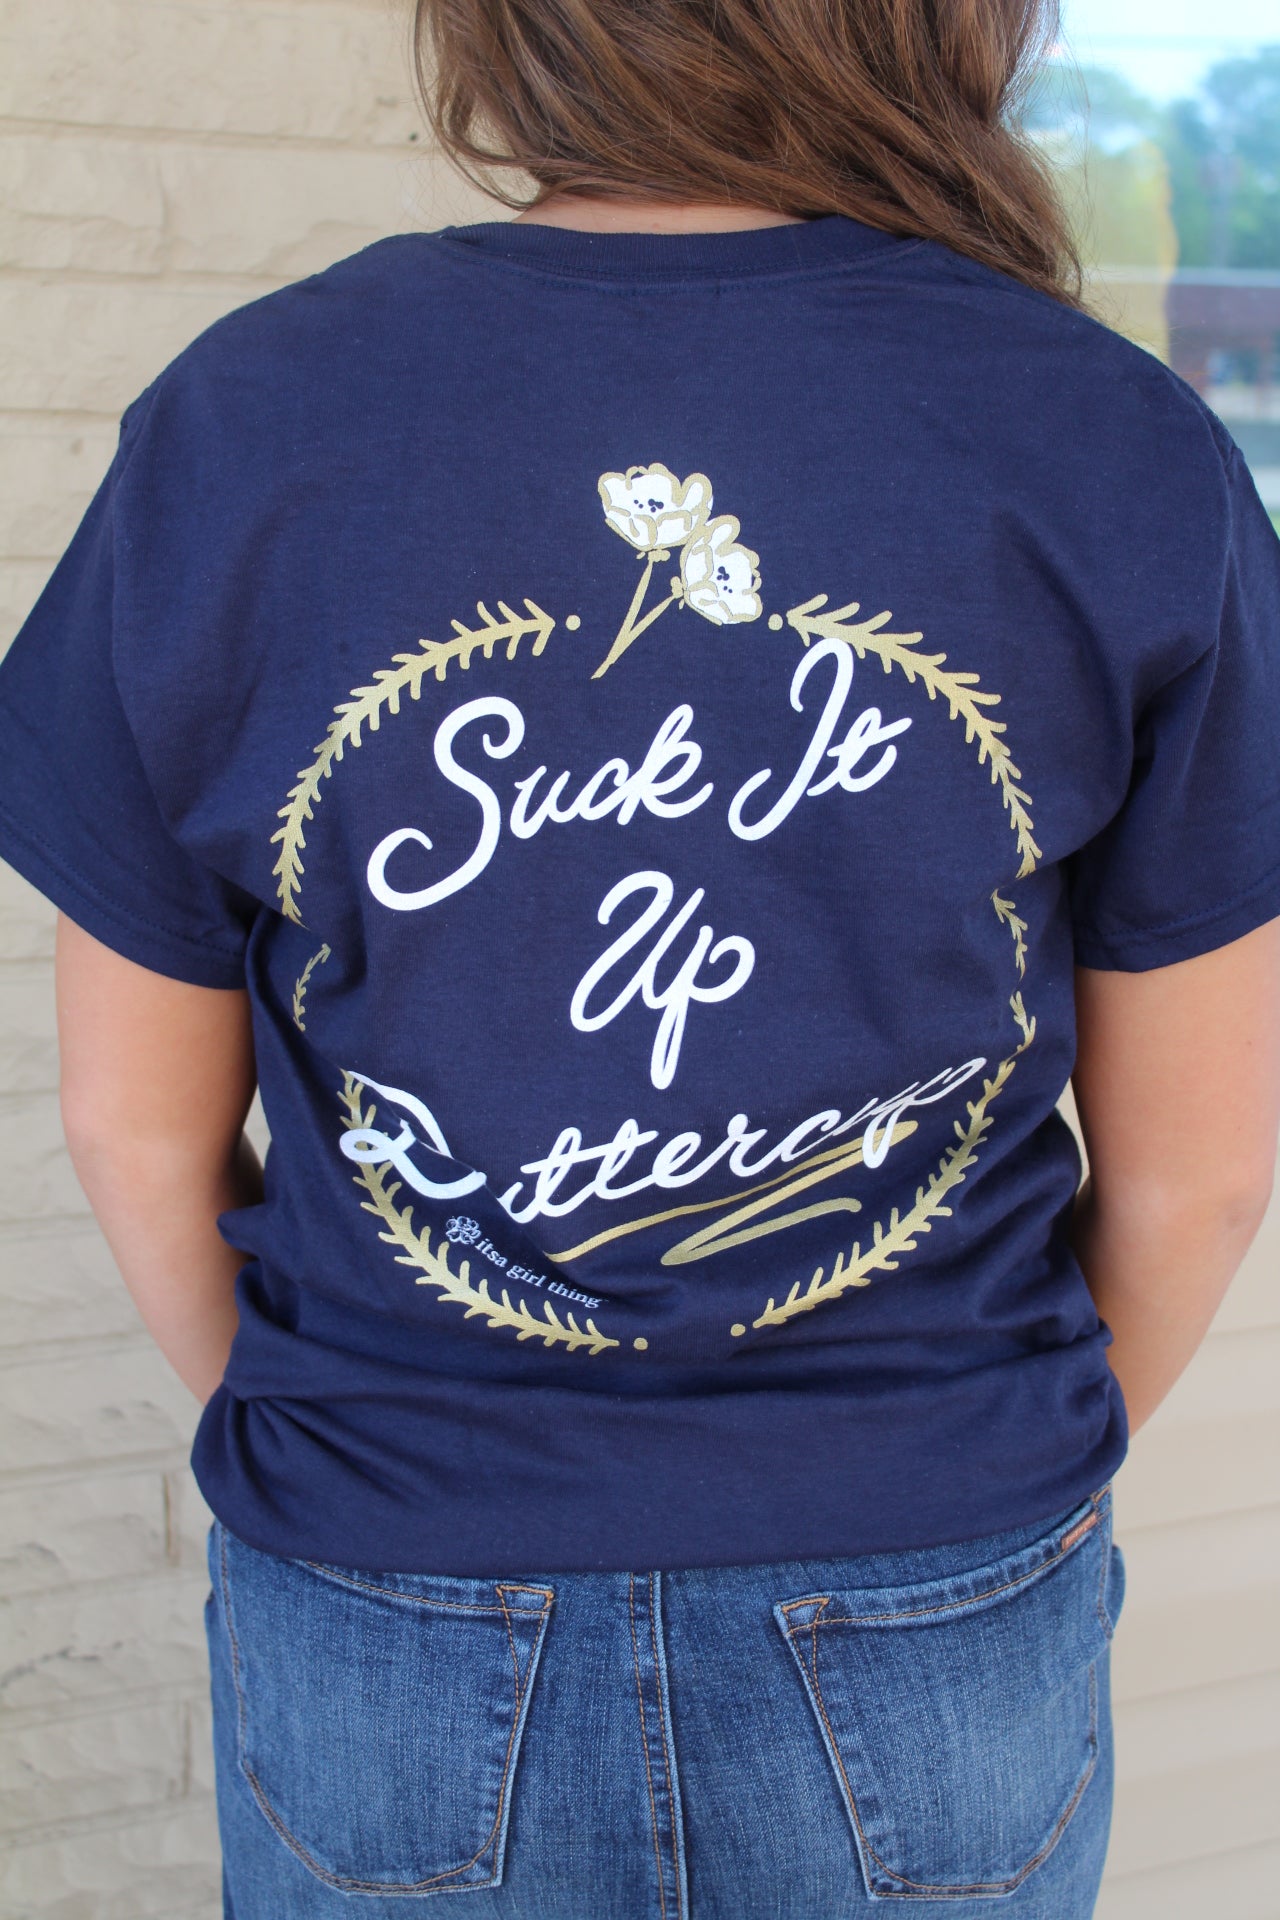 Suck It Up Buttercup Graphic Tee